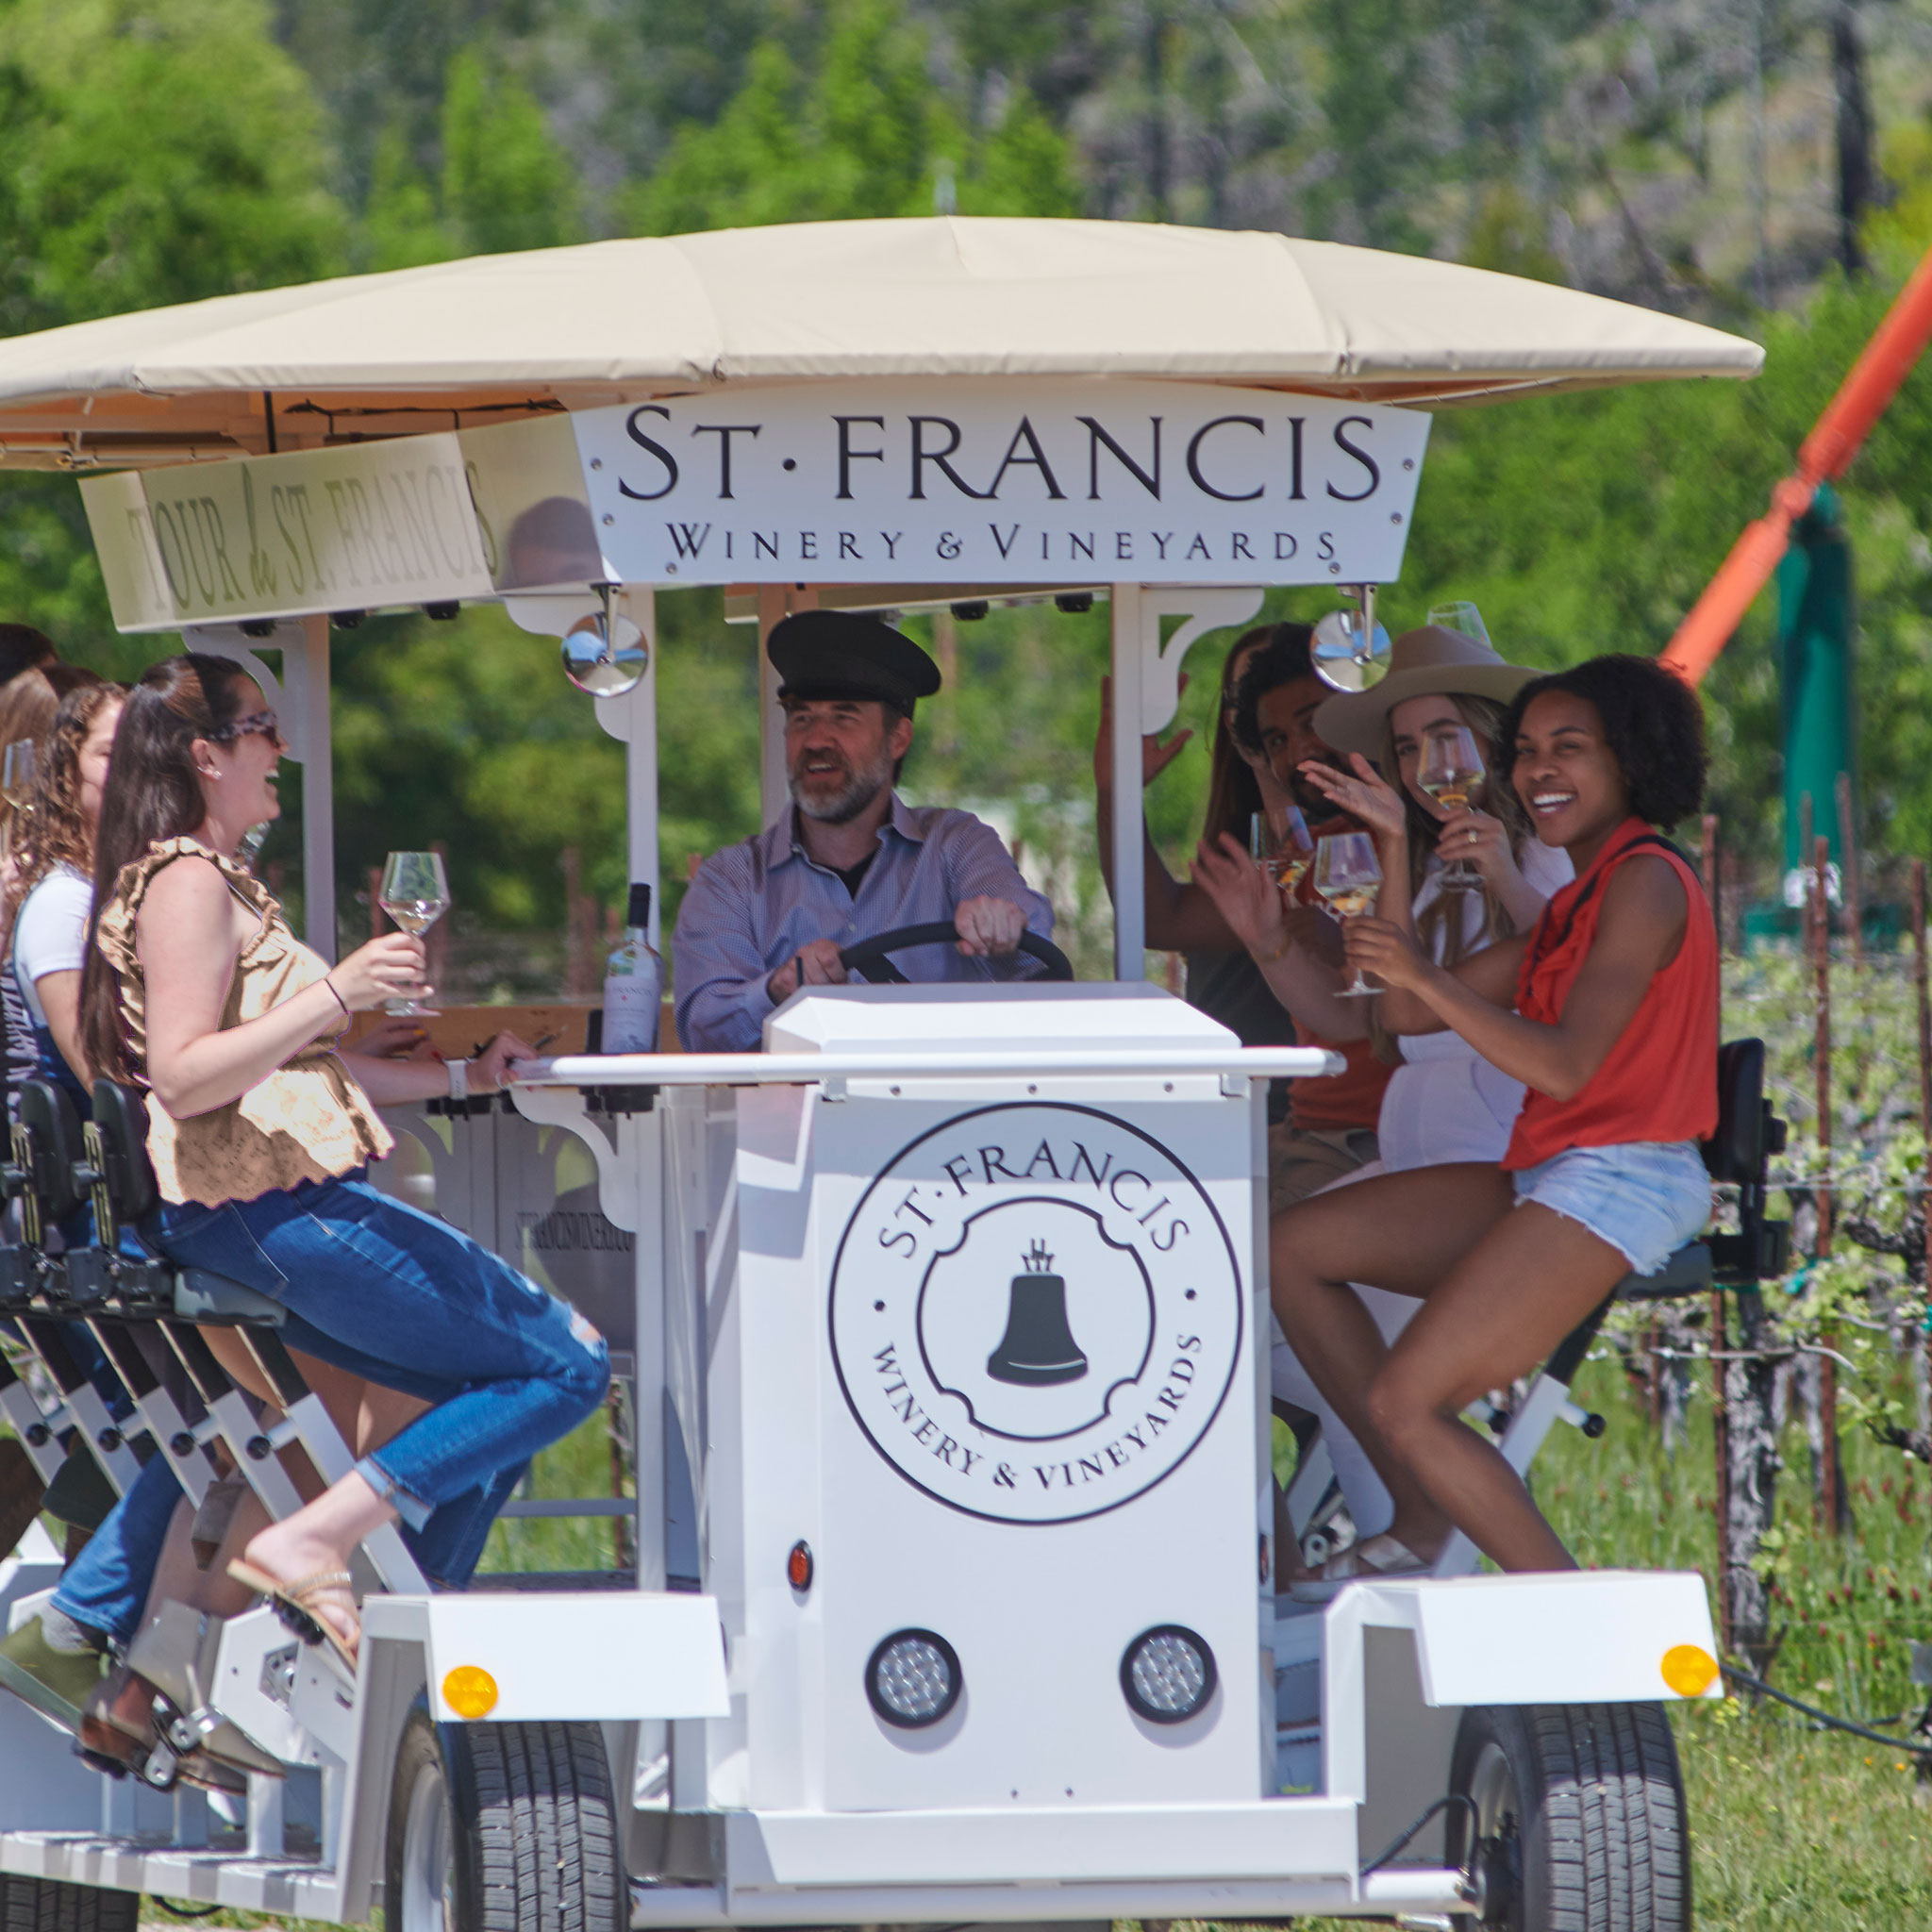 Trolley Tours & Tastings at St. Francis Winery